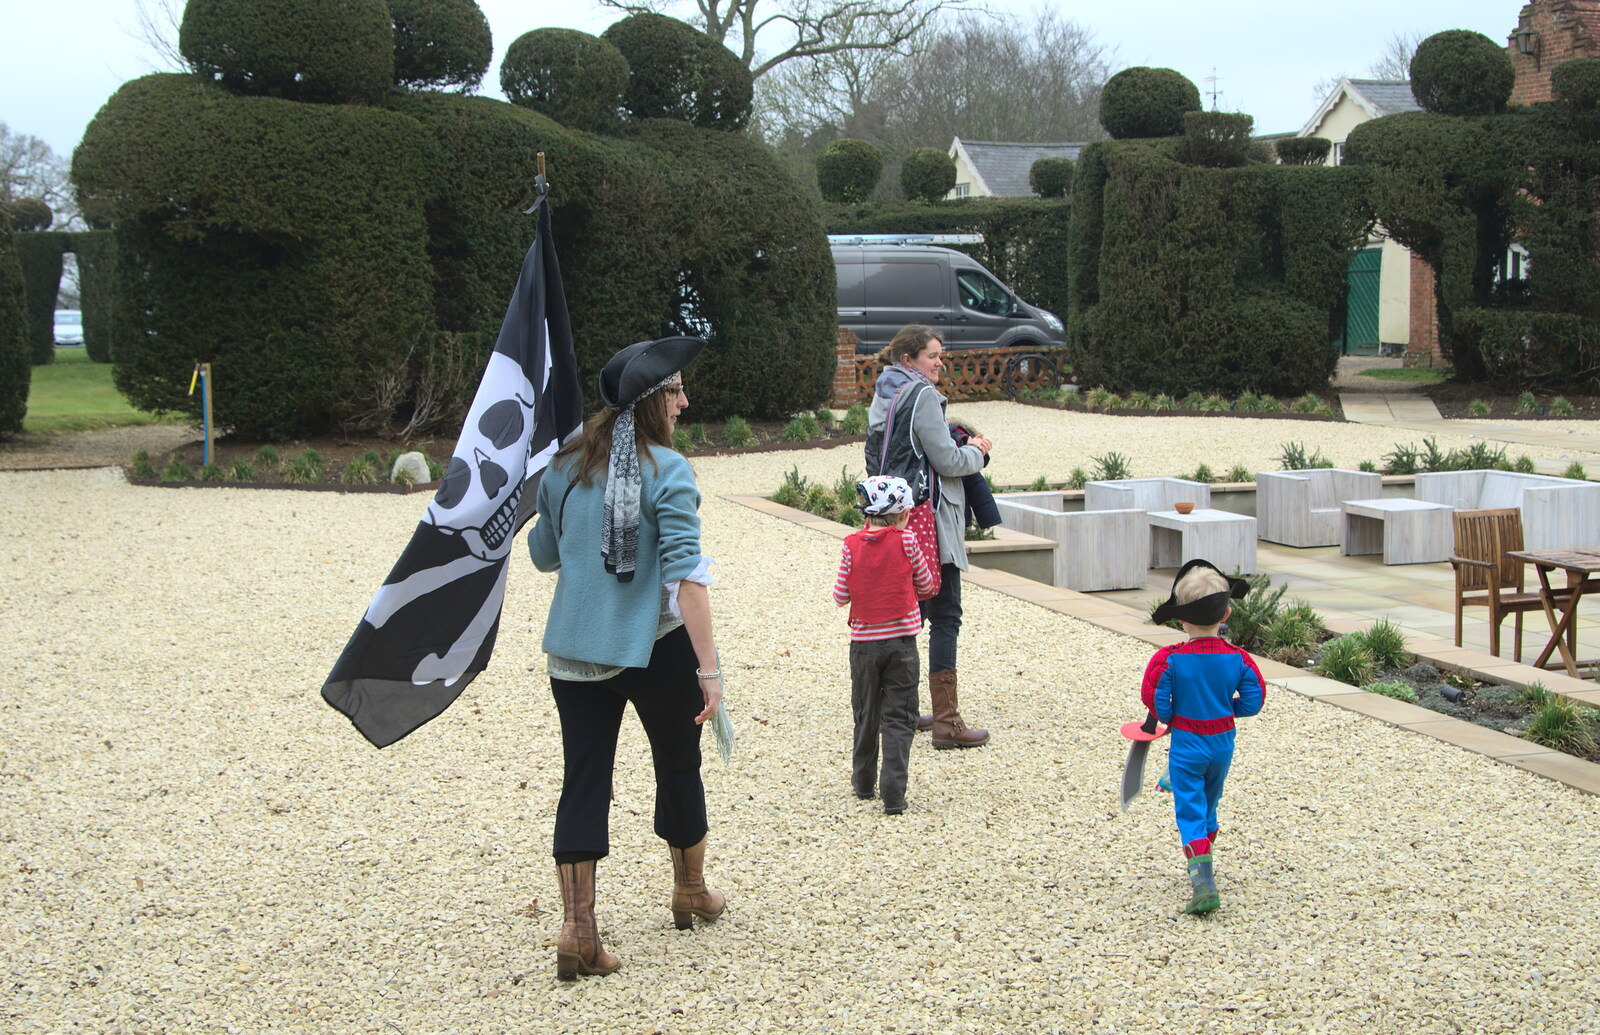 We head off, with Suey and the flag from The Launching of the Jolly Conkerer, The Oaksmere, Brome, Suffolk - 3rd April 2015